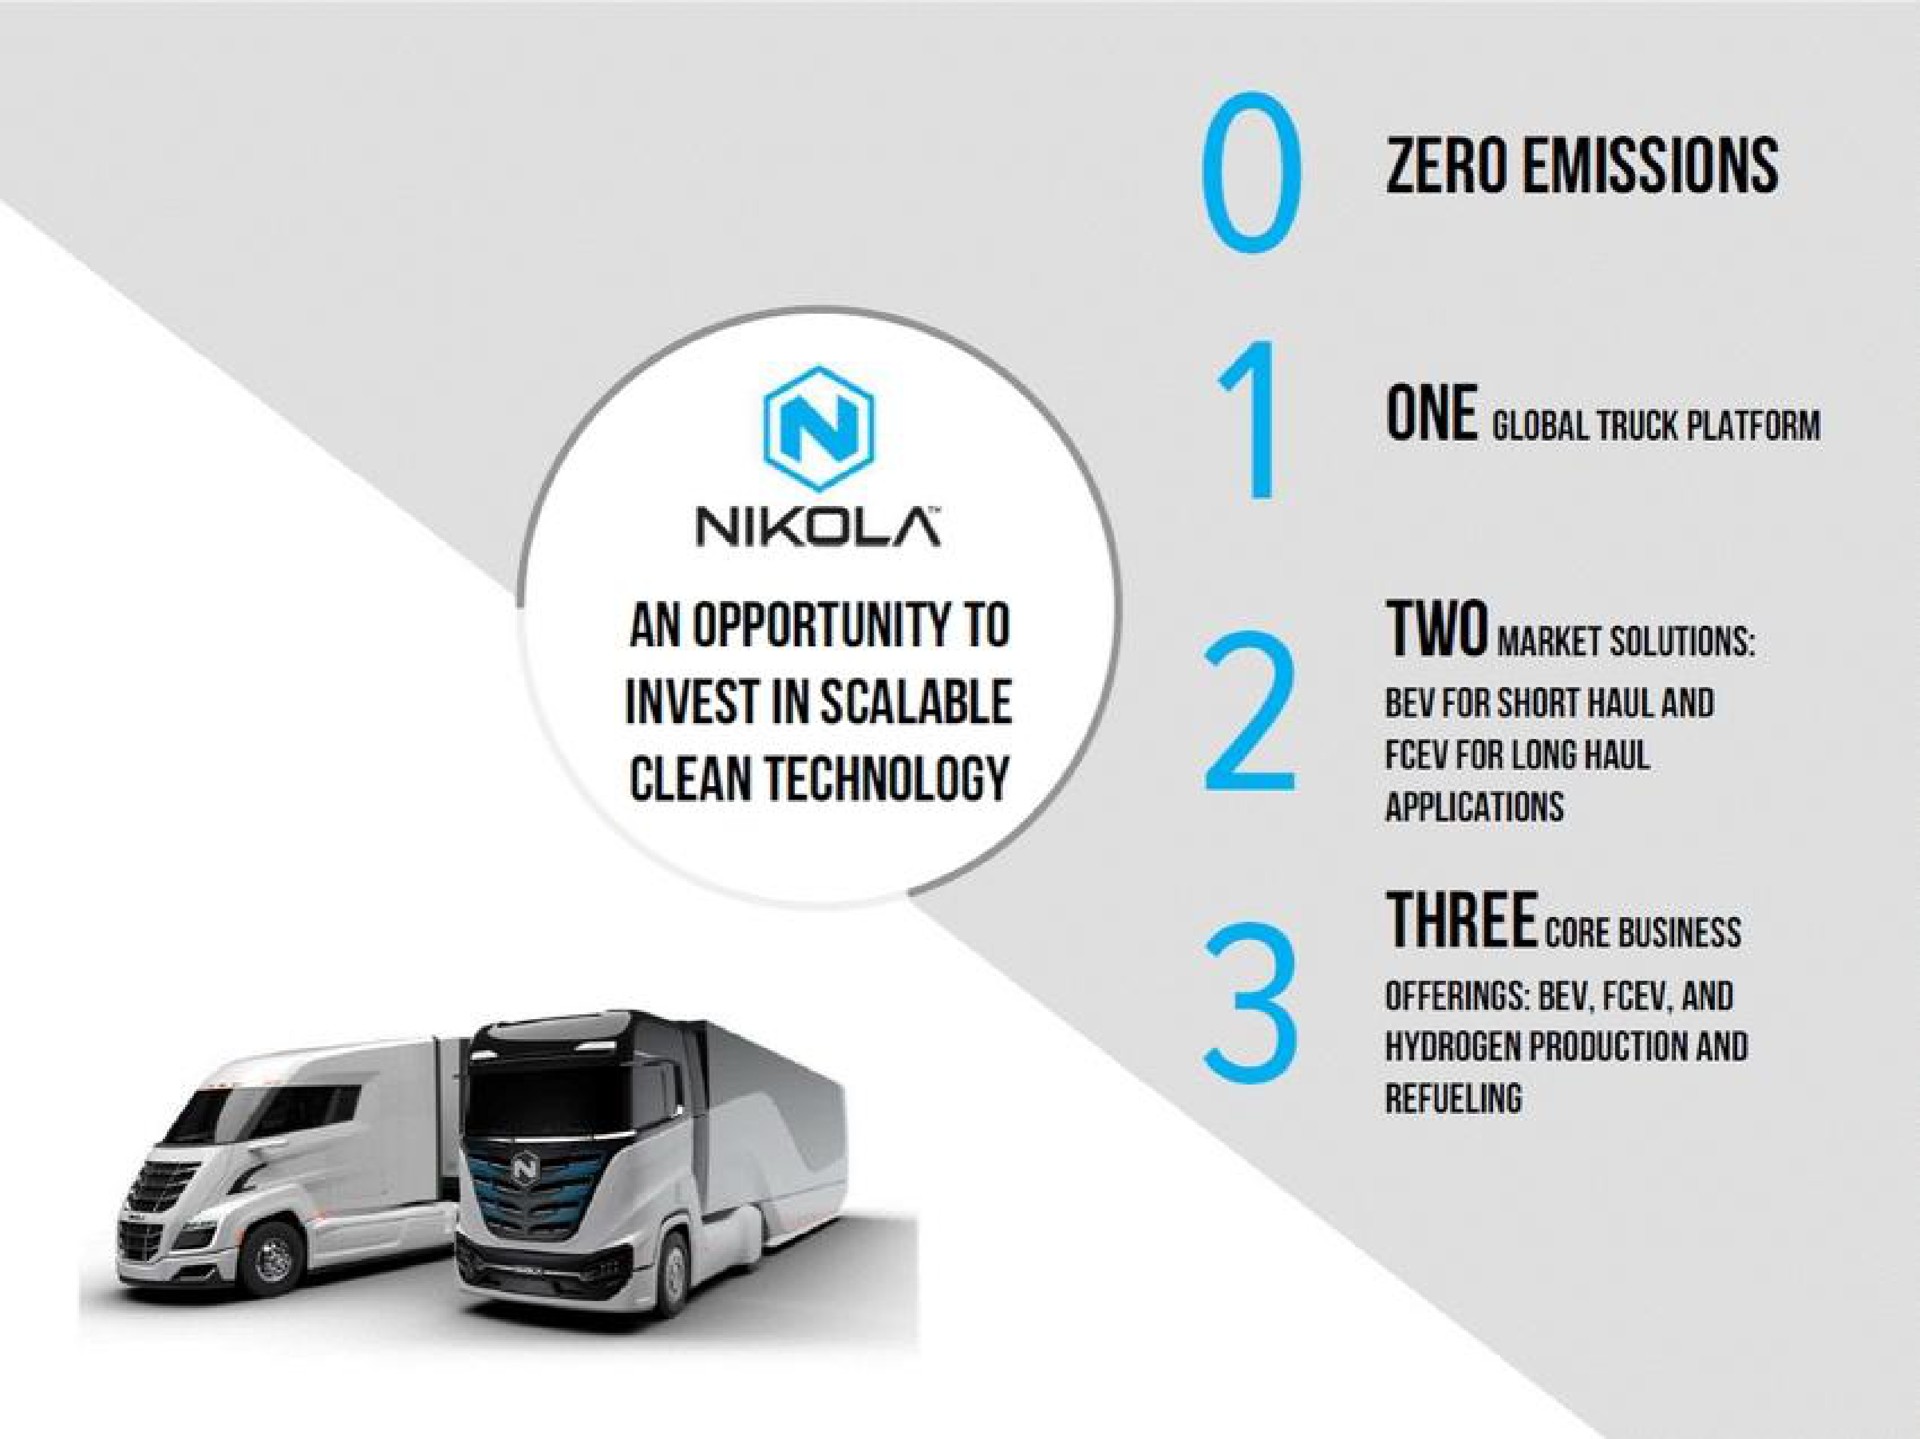 zero emissions yeas global truck platform an opportunity to invest in scalable clean technology two for short haul and fen three core offerings and hydrogen production and | Nikola